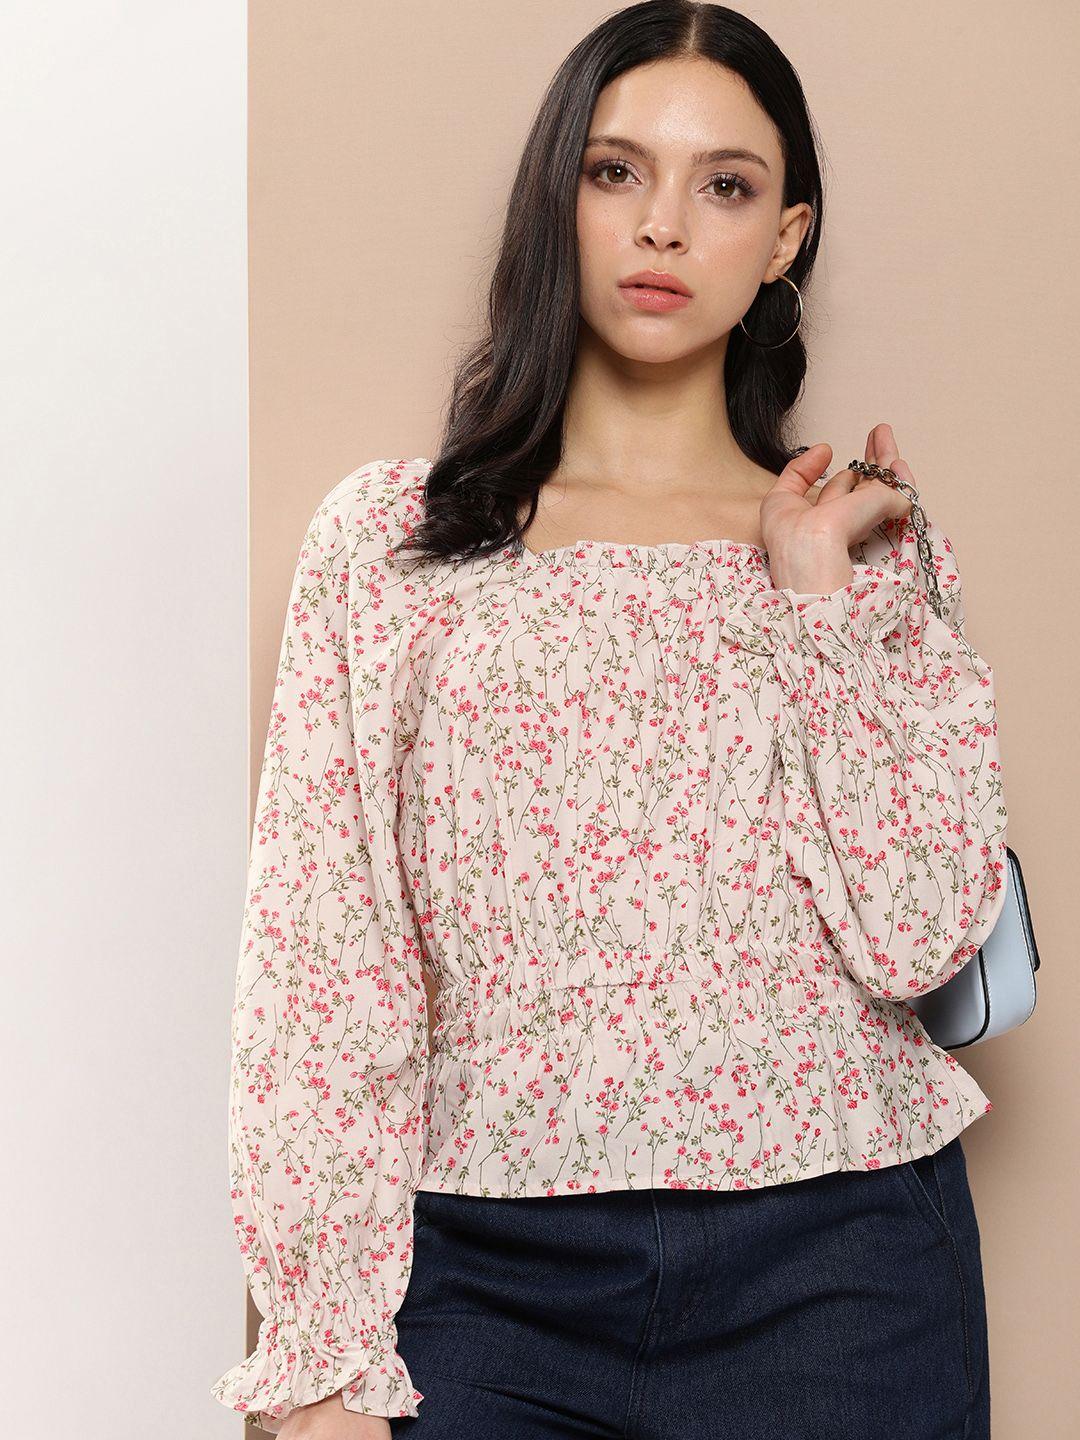 encore by invictus floral printed peplum top